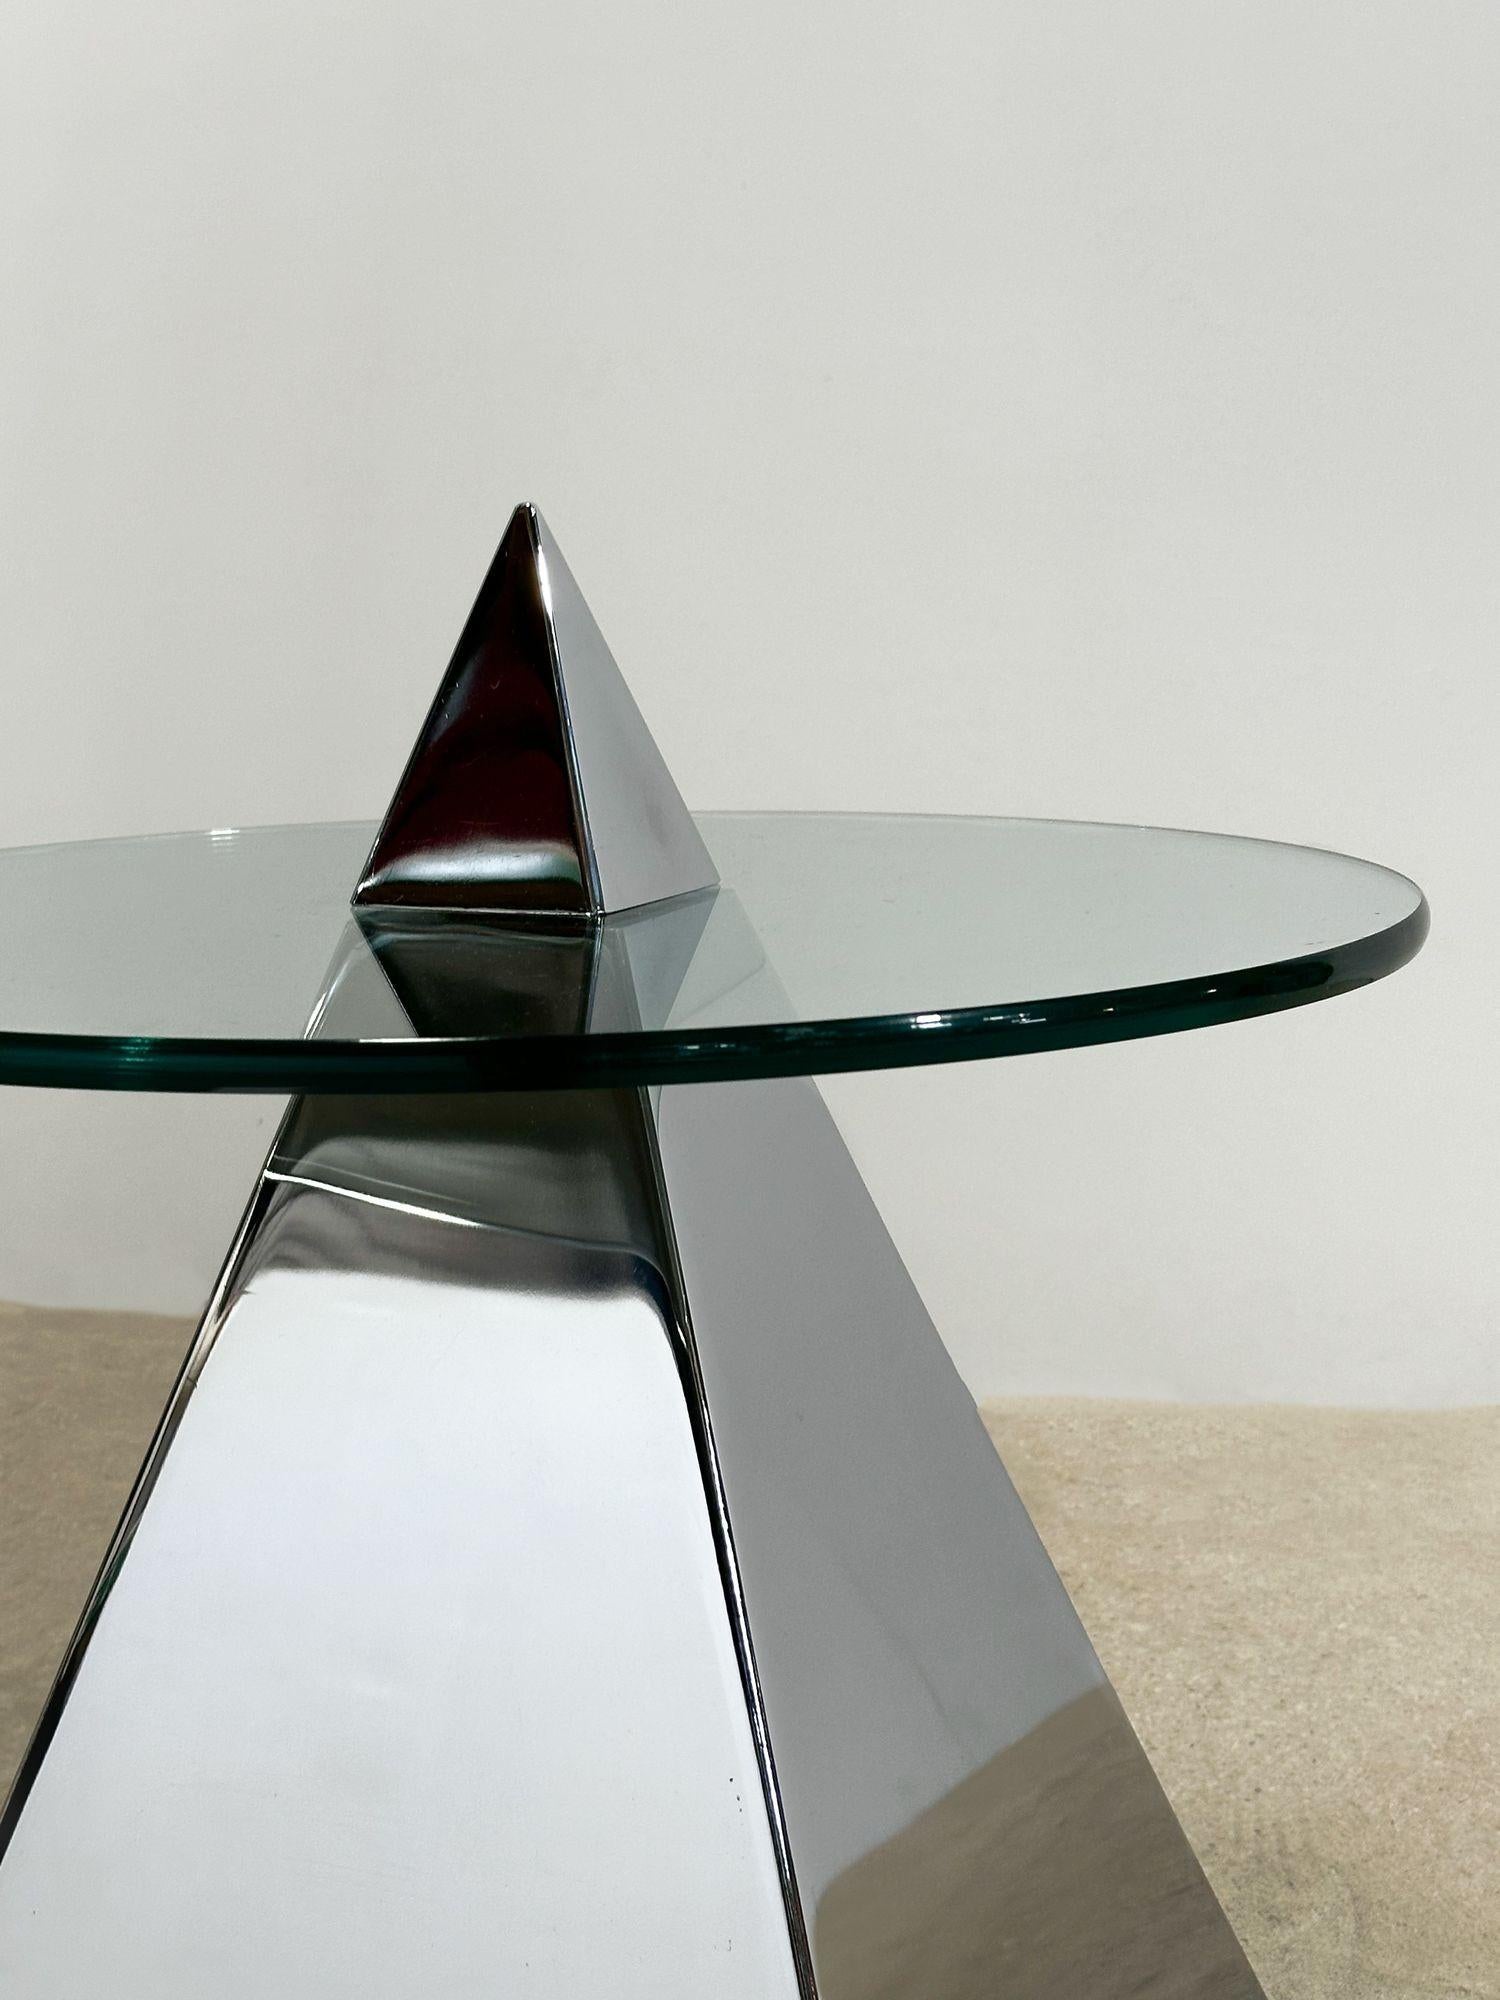 Late 20th Century Post Modern Chrome and Glass Triangle/Pyramid Side/End Table, 1980 For Sale